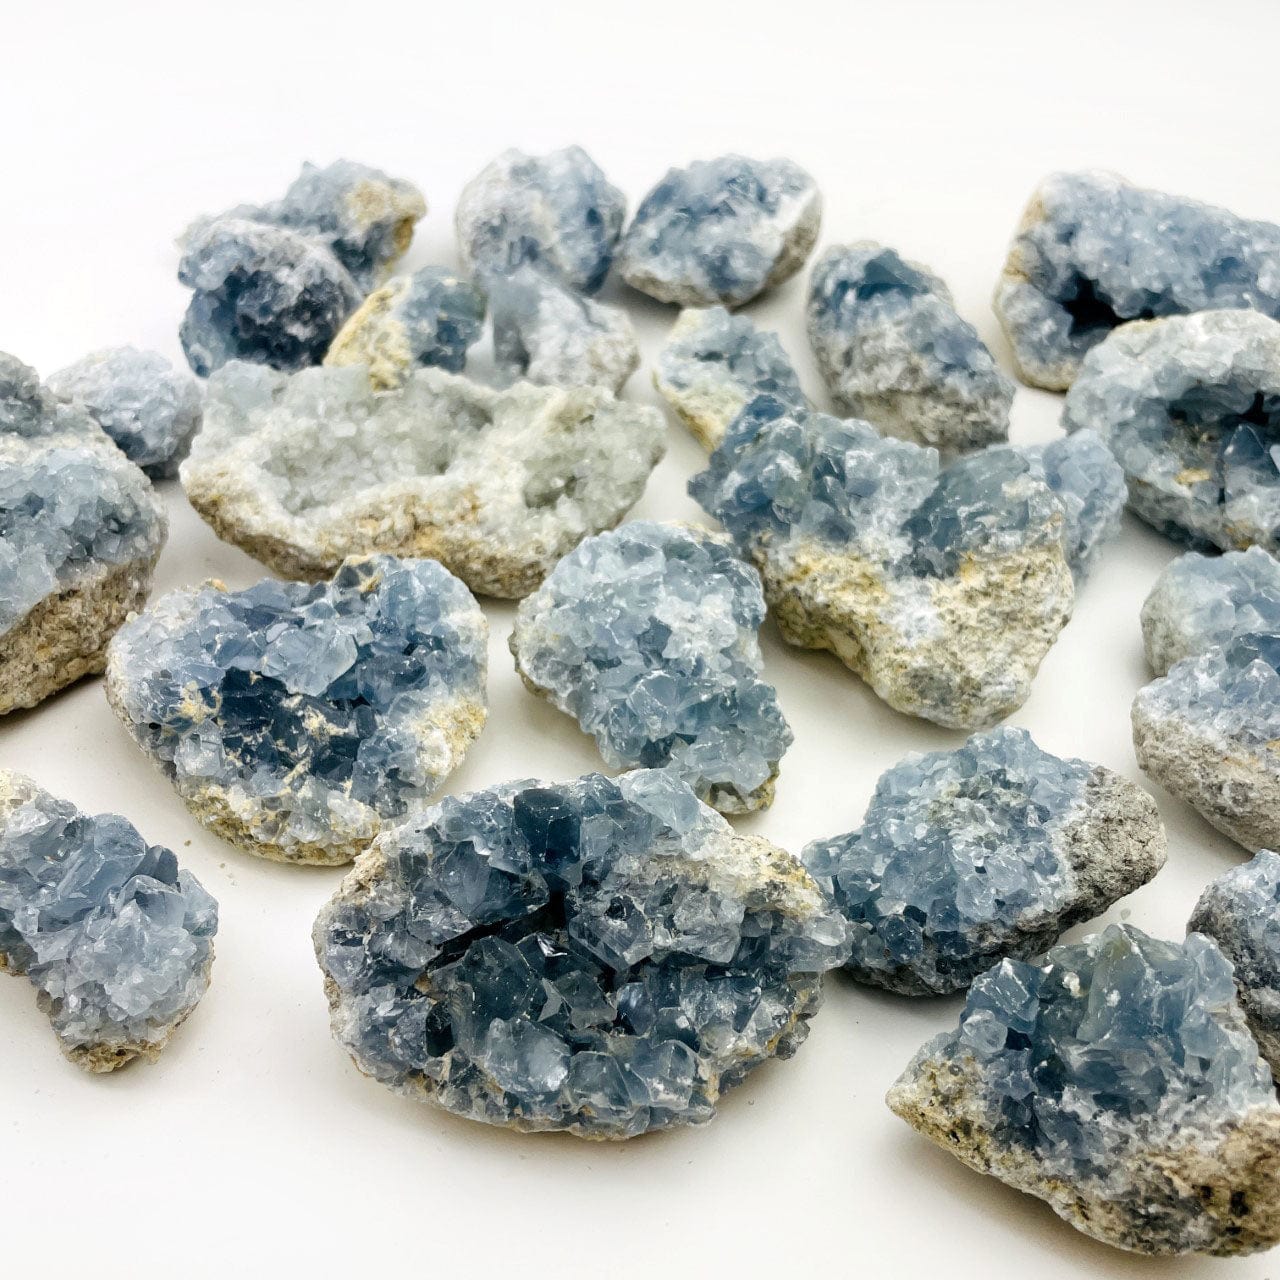 Celestite Crystals from a side view